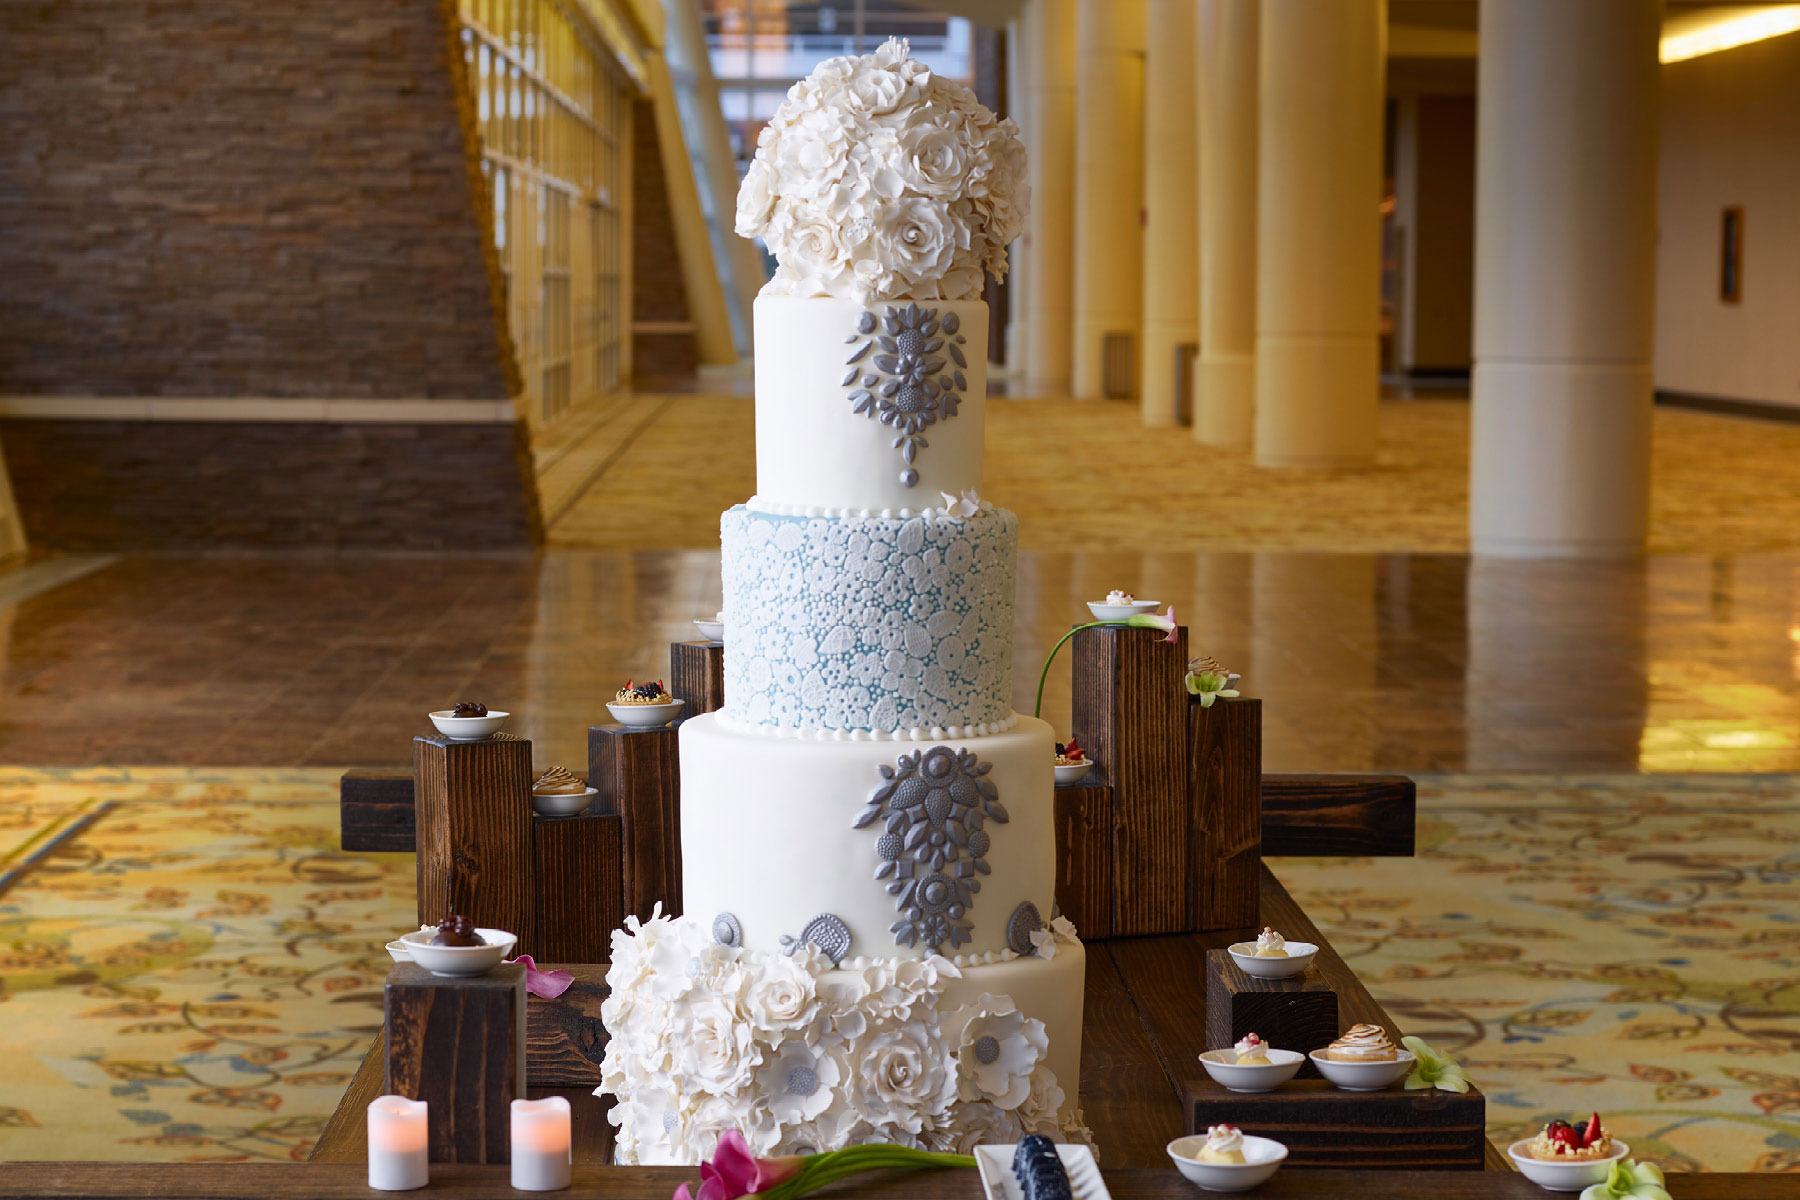 White Wedding Cake decorated with blue flowers